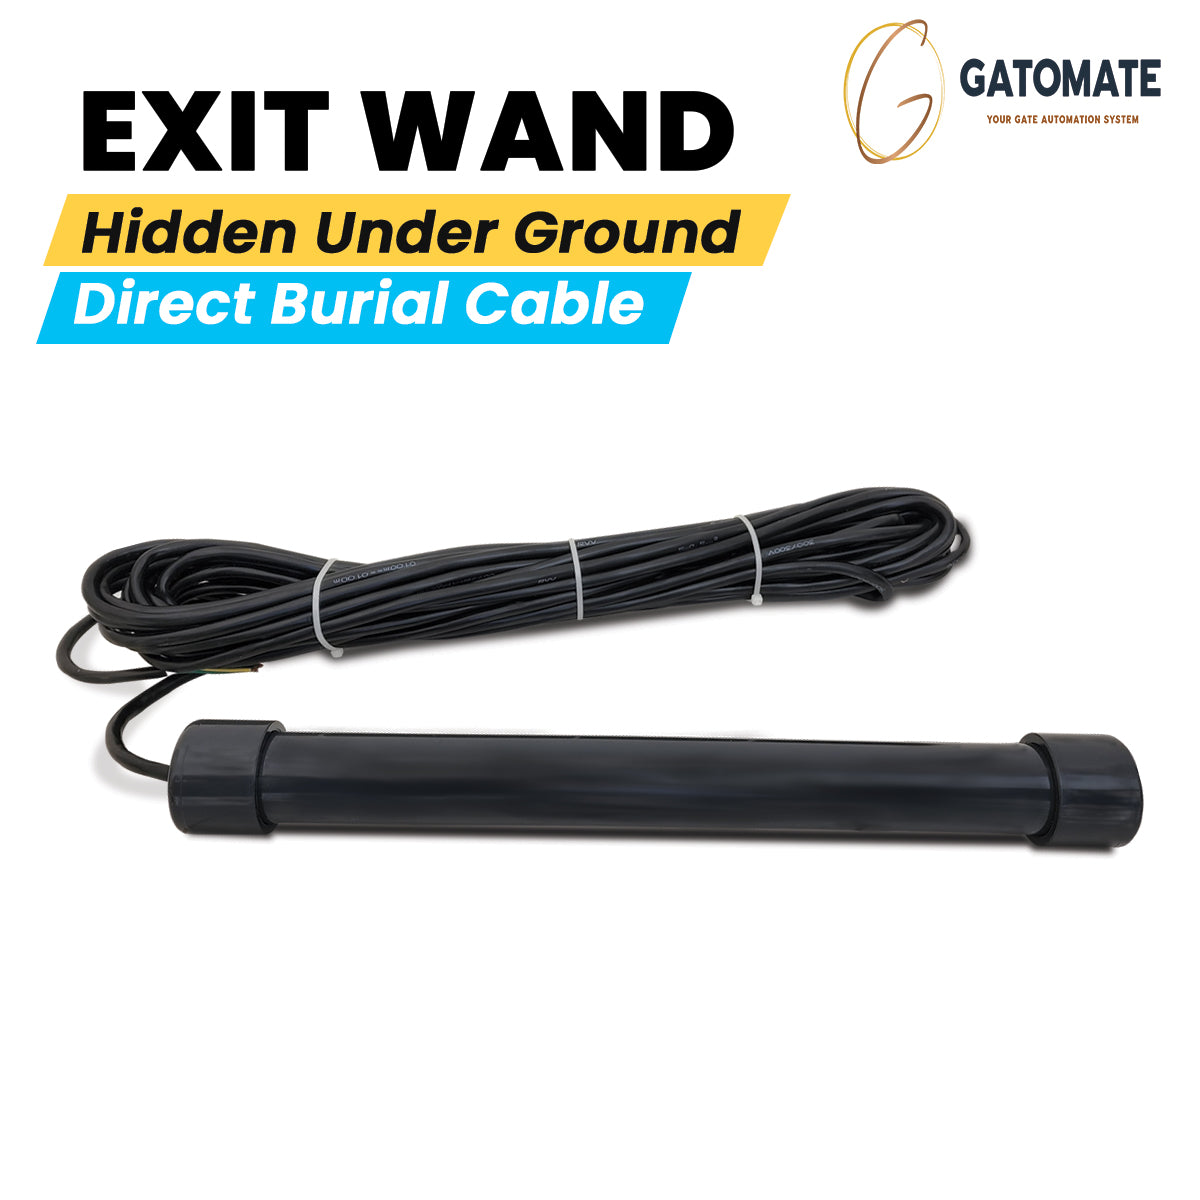 The Exit Wand, For Gate Opener, gatomate